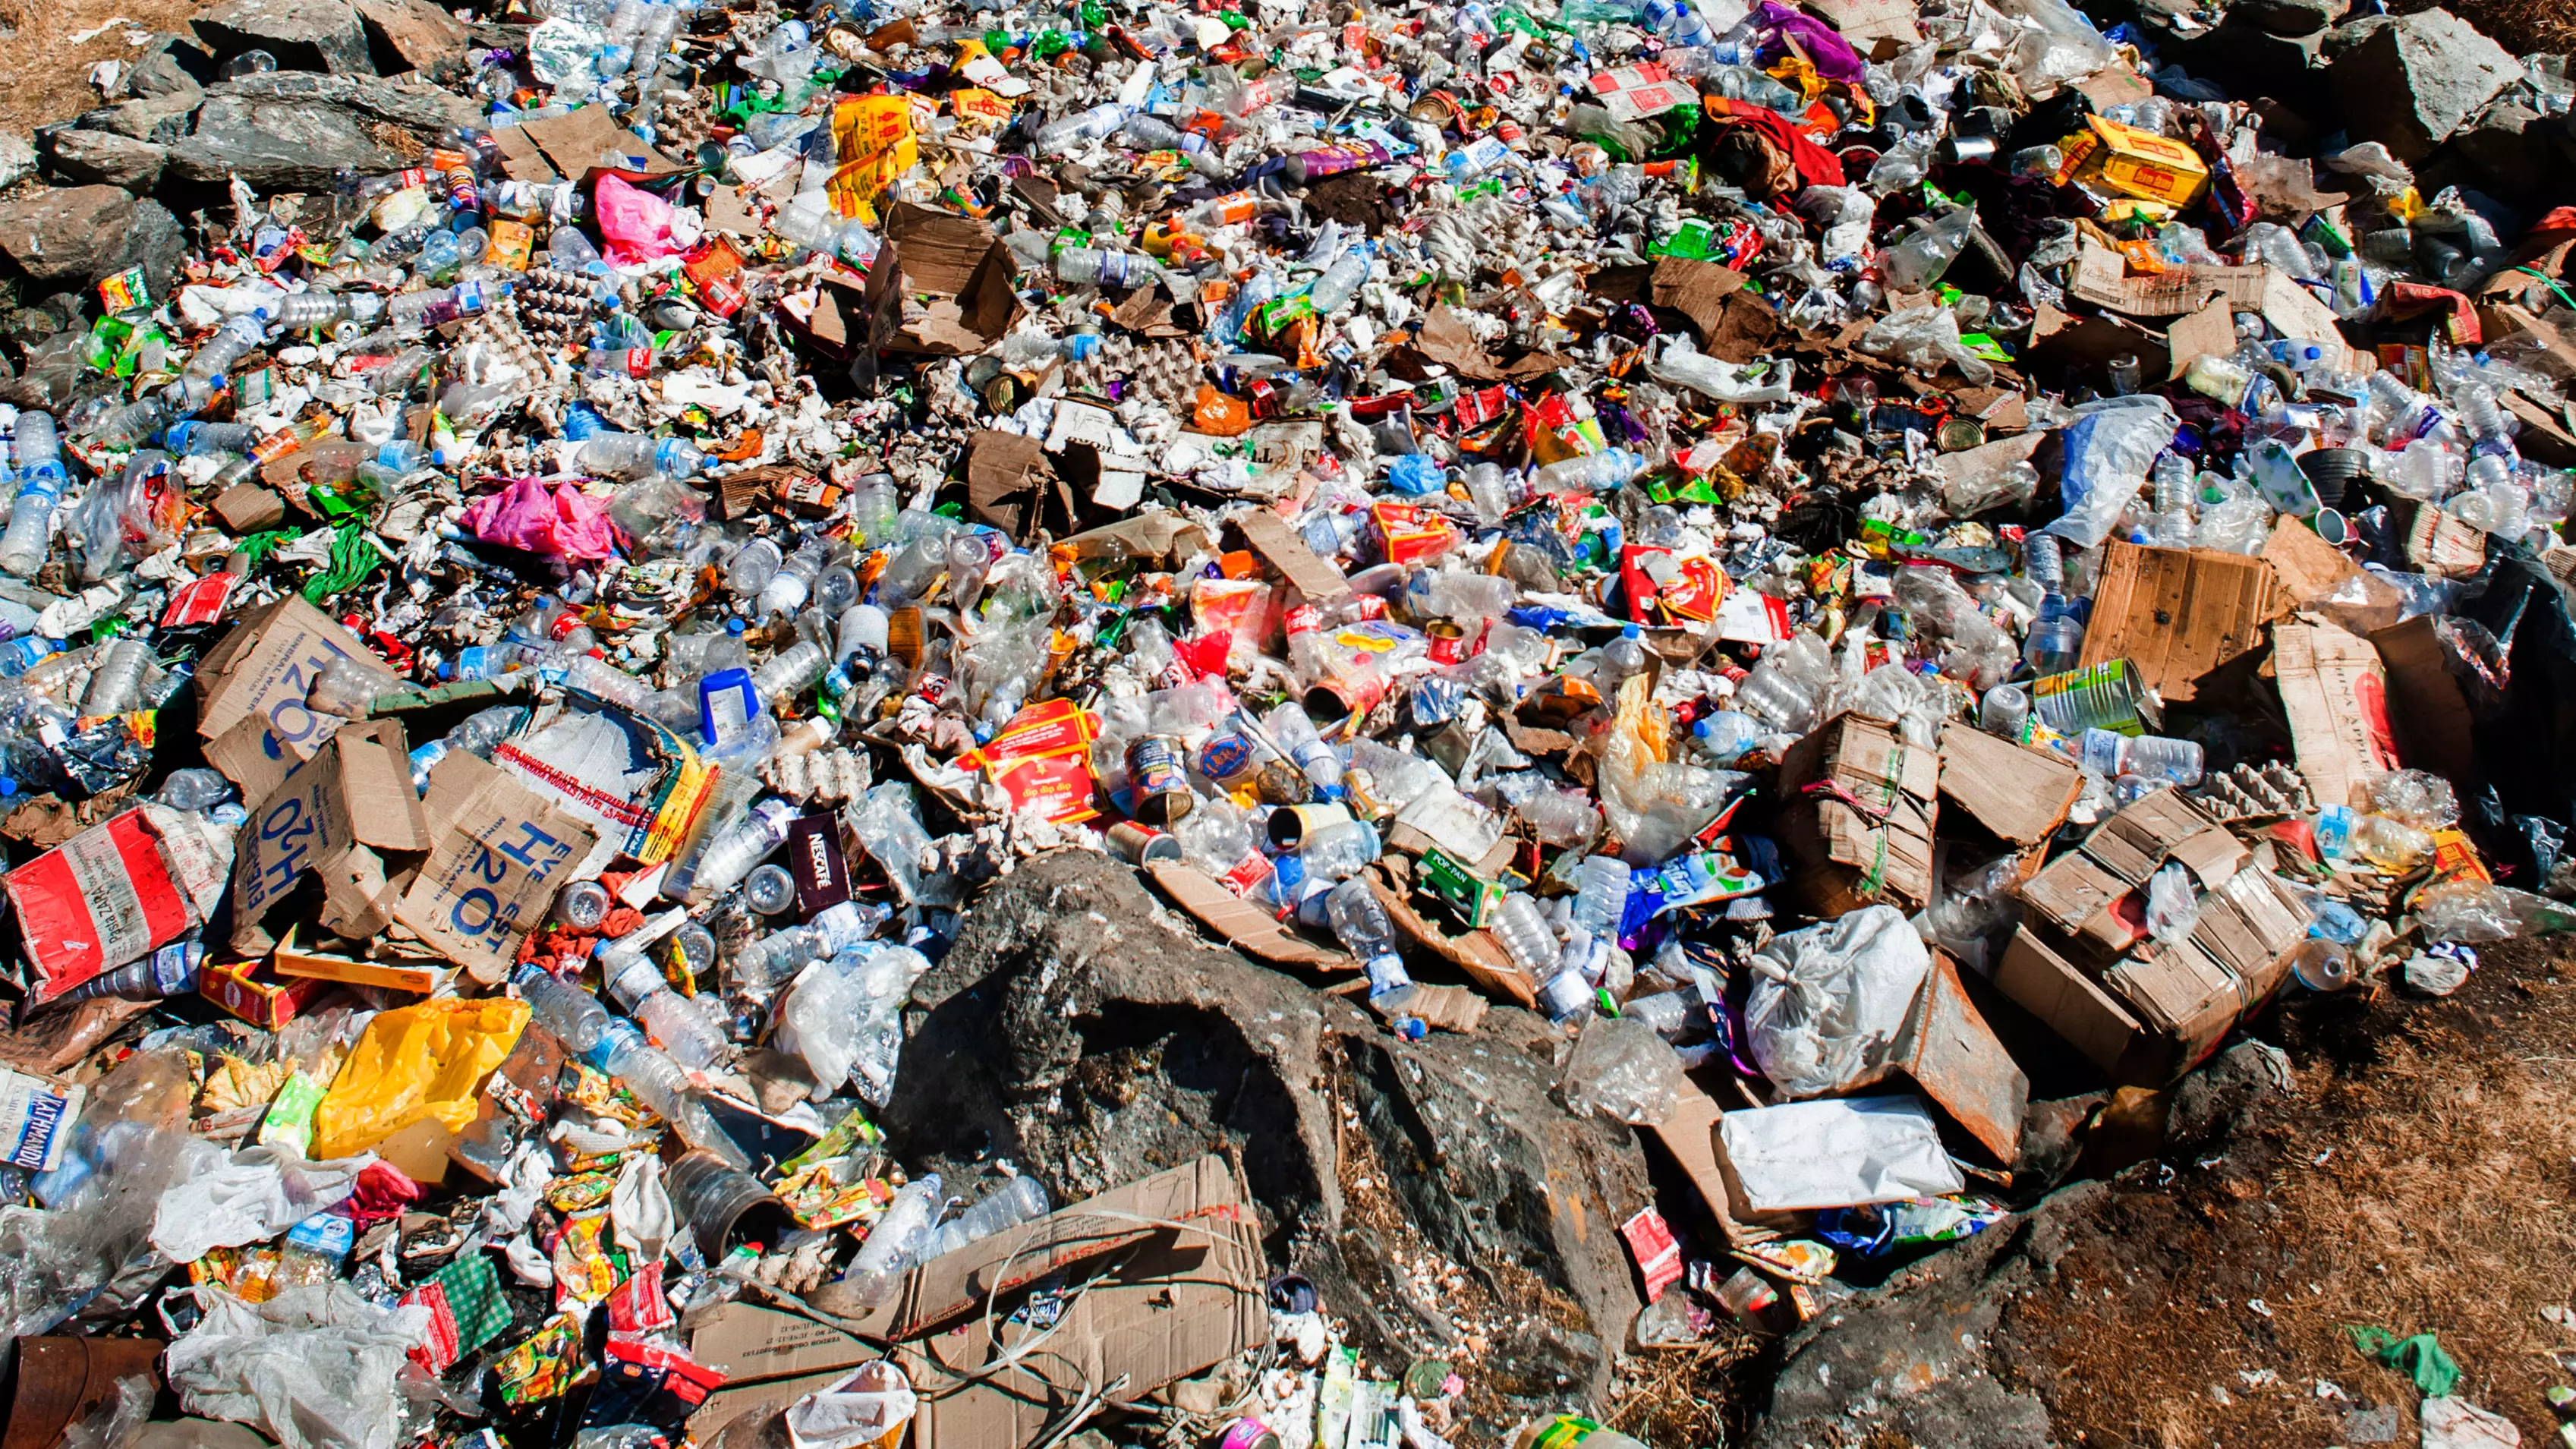 Huge Piles Of Rubbish Show Impact Of Tourism On Mount Everest